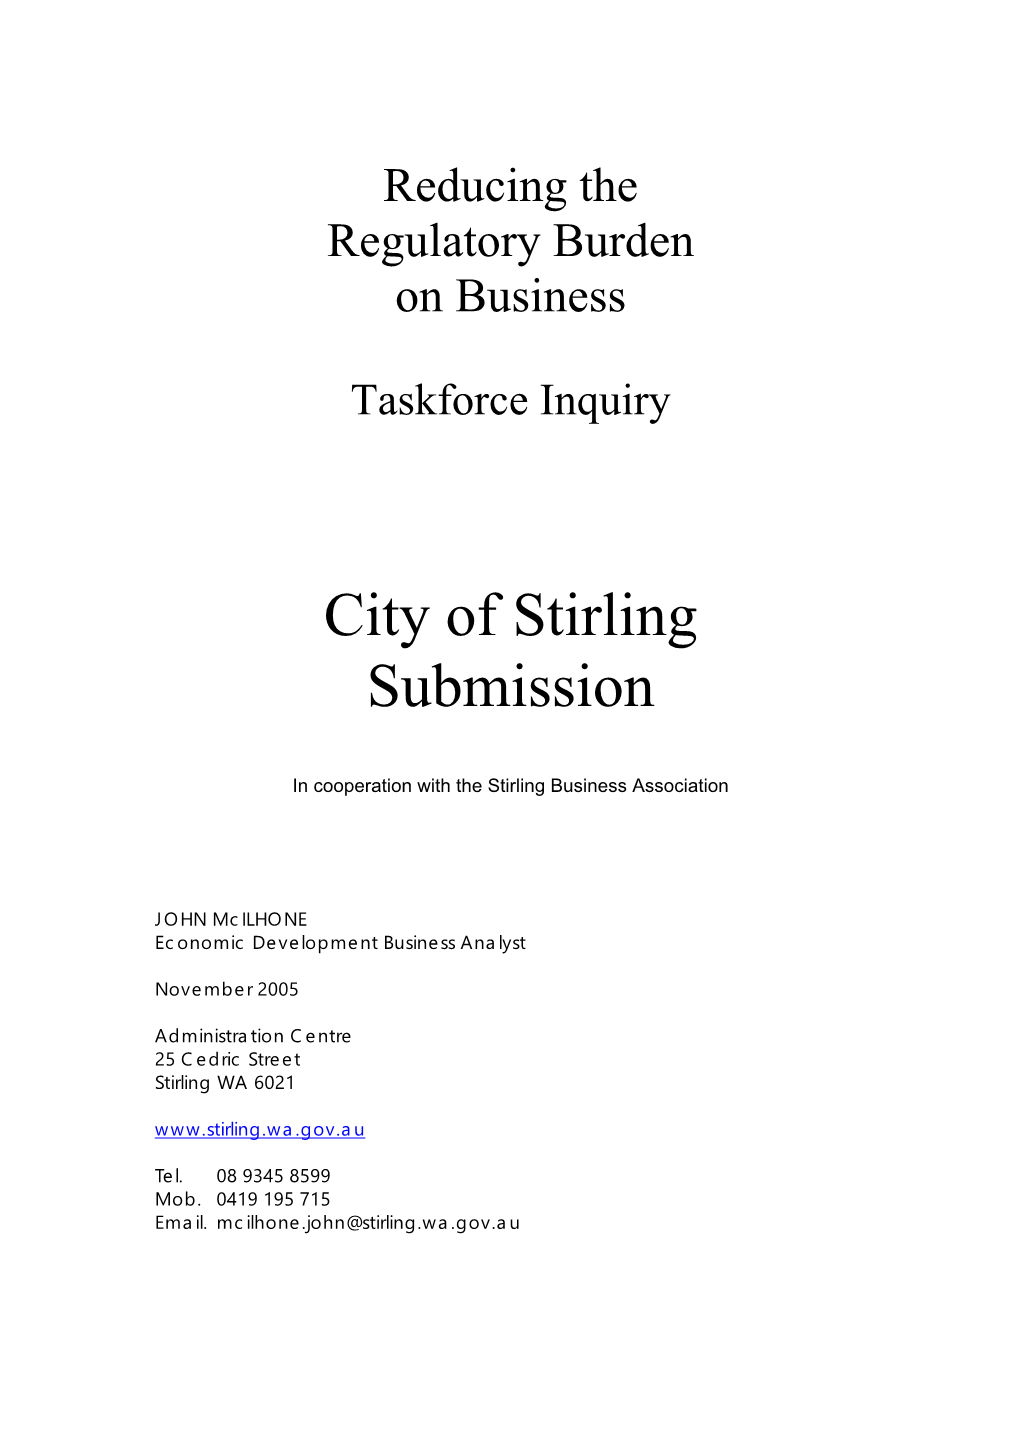 City of Stirling Submission